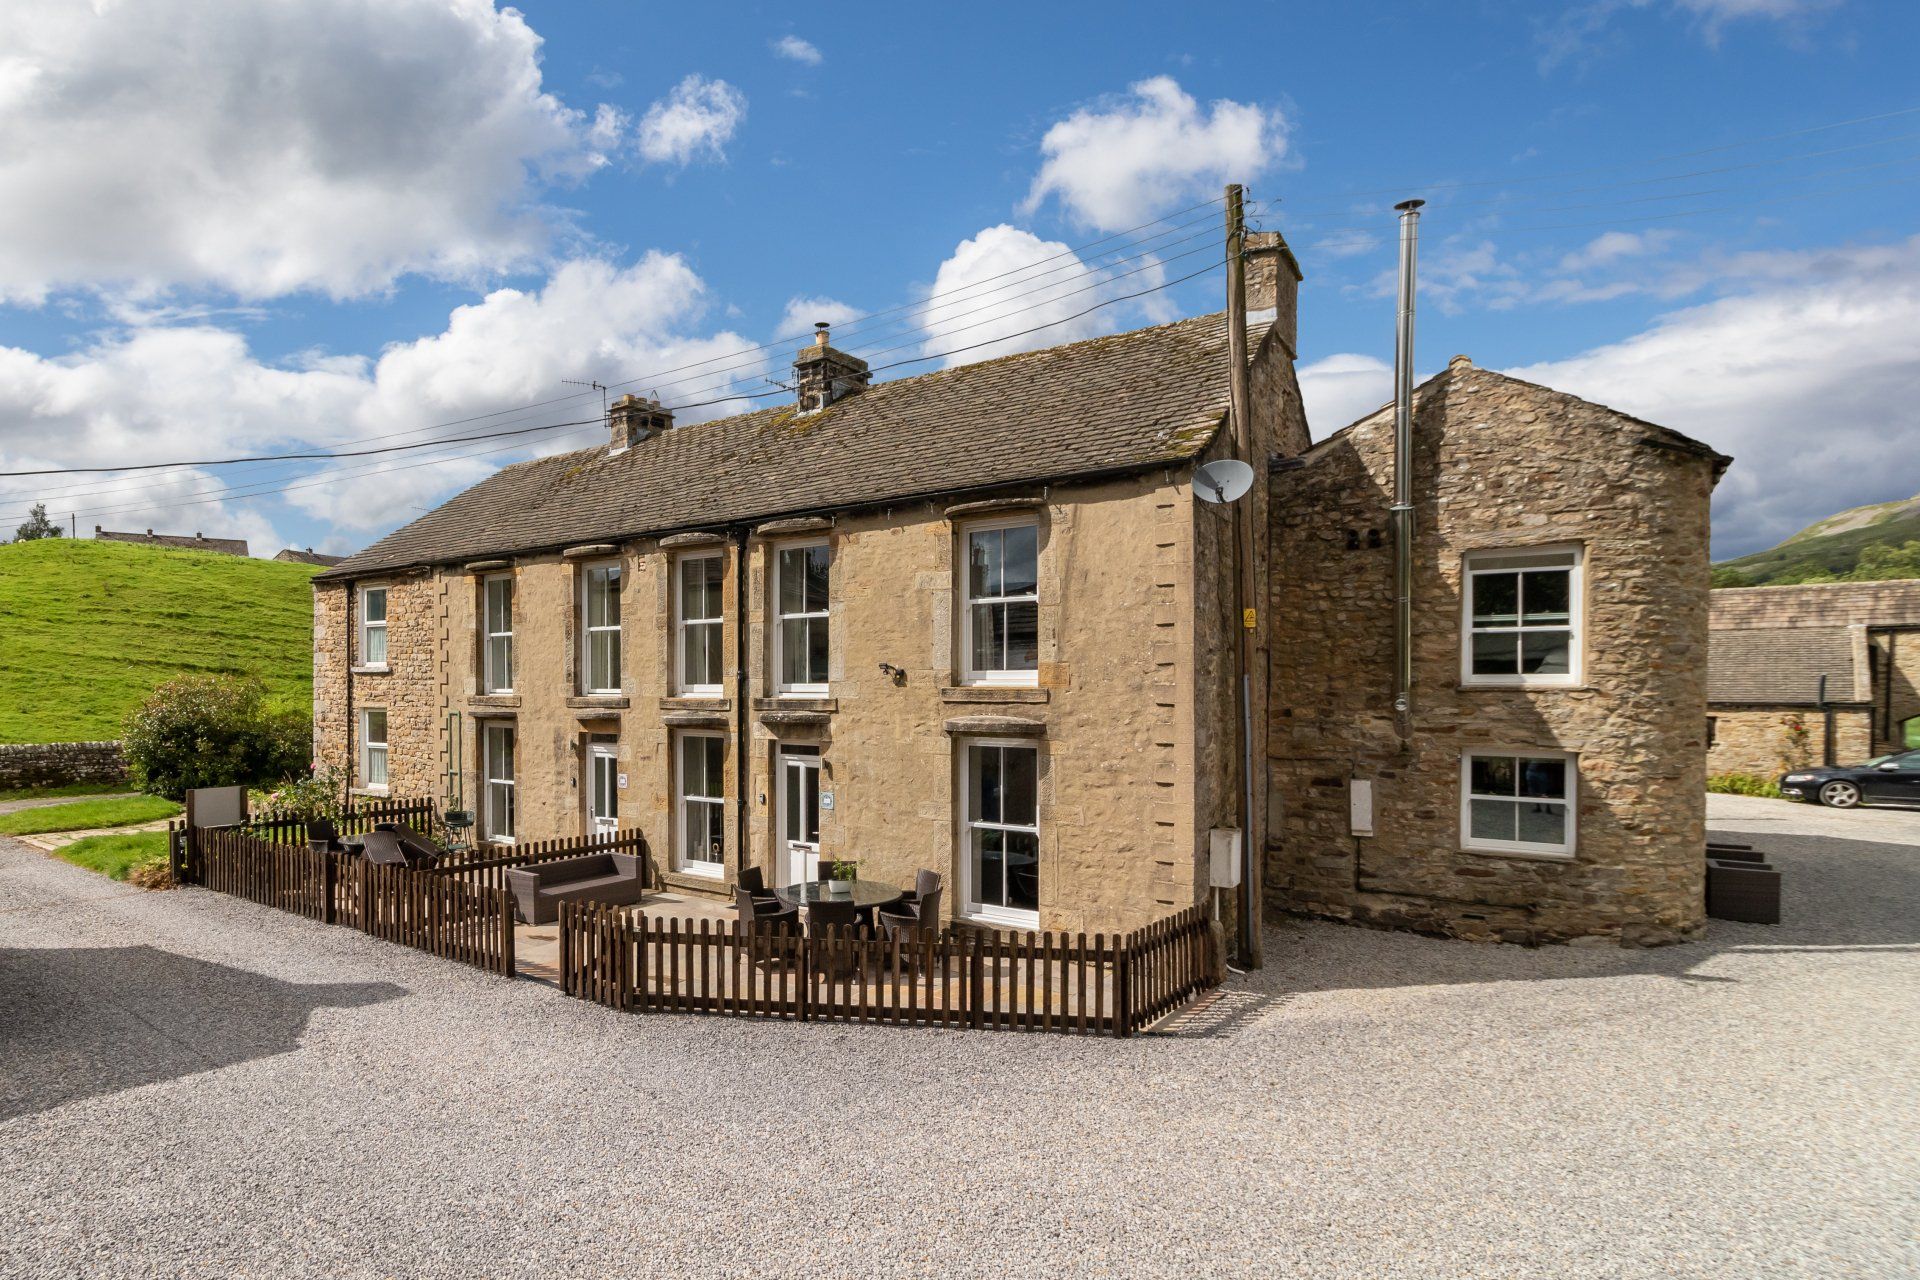 Reeth Holiday Cottages, Richmond North Yorkshire